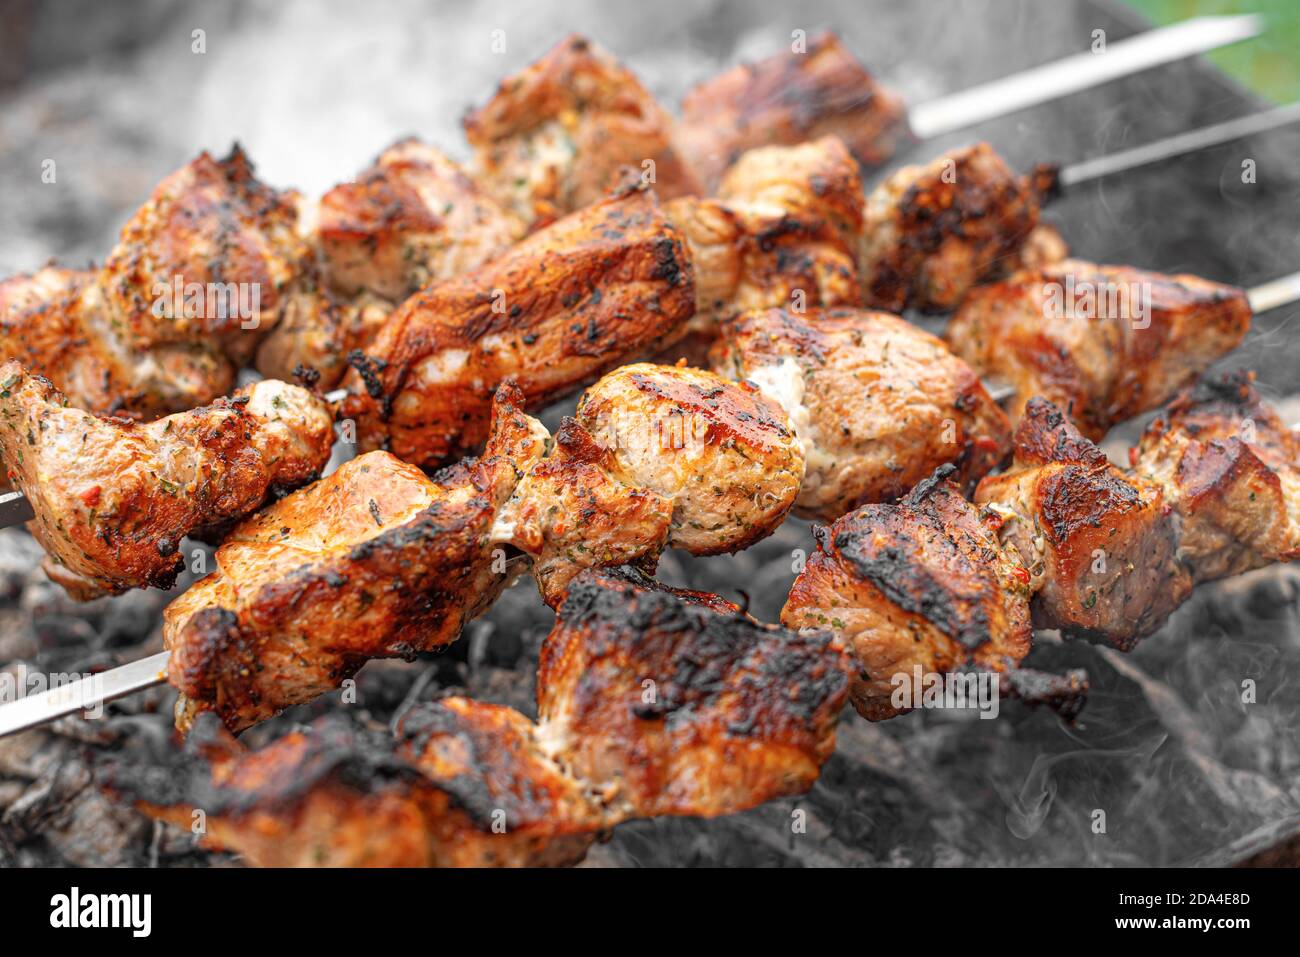 The barbecue is grilled on the grill. Meat or shish kebab on the fire Stock Photo